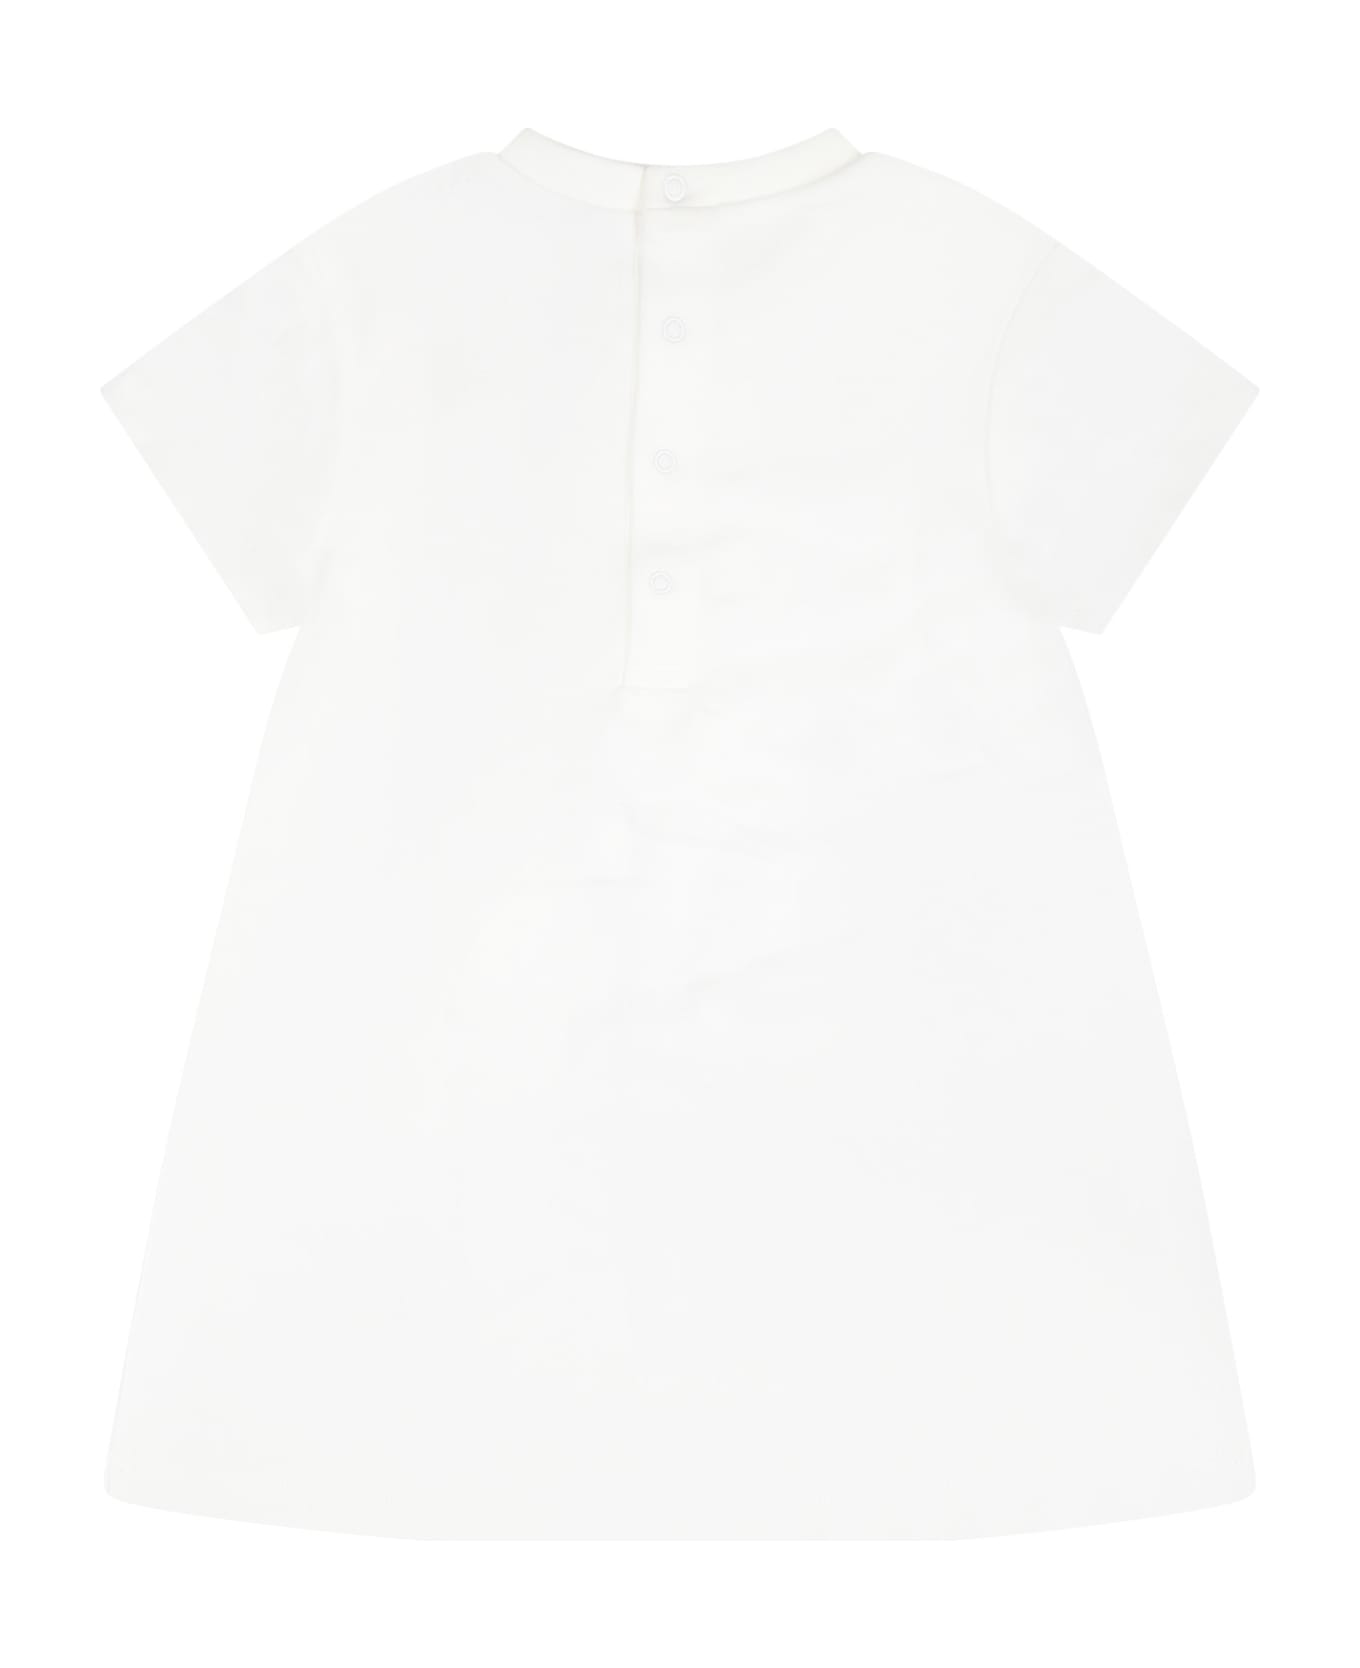 Marc Jacobs White Dress For Baby Girl With Iconic Bag - White